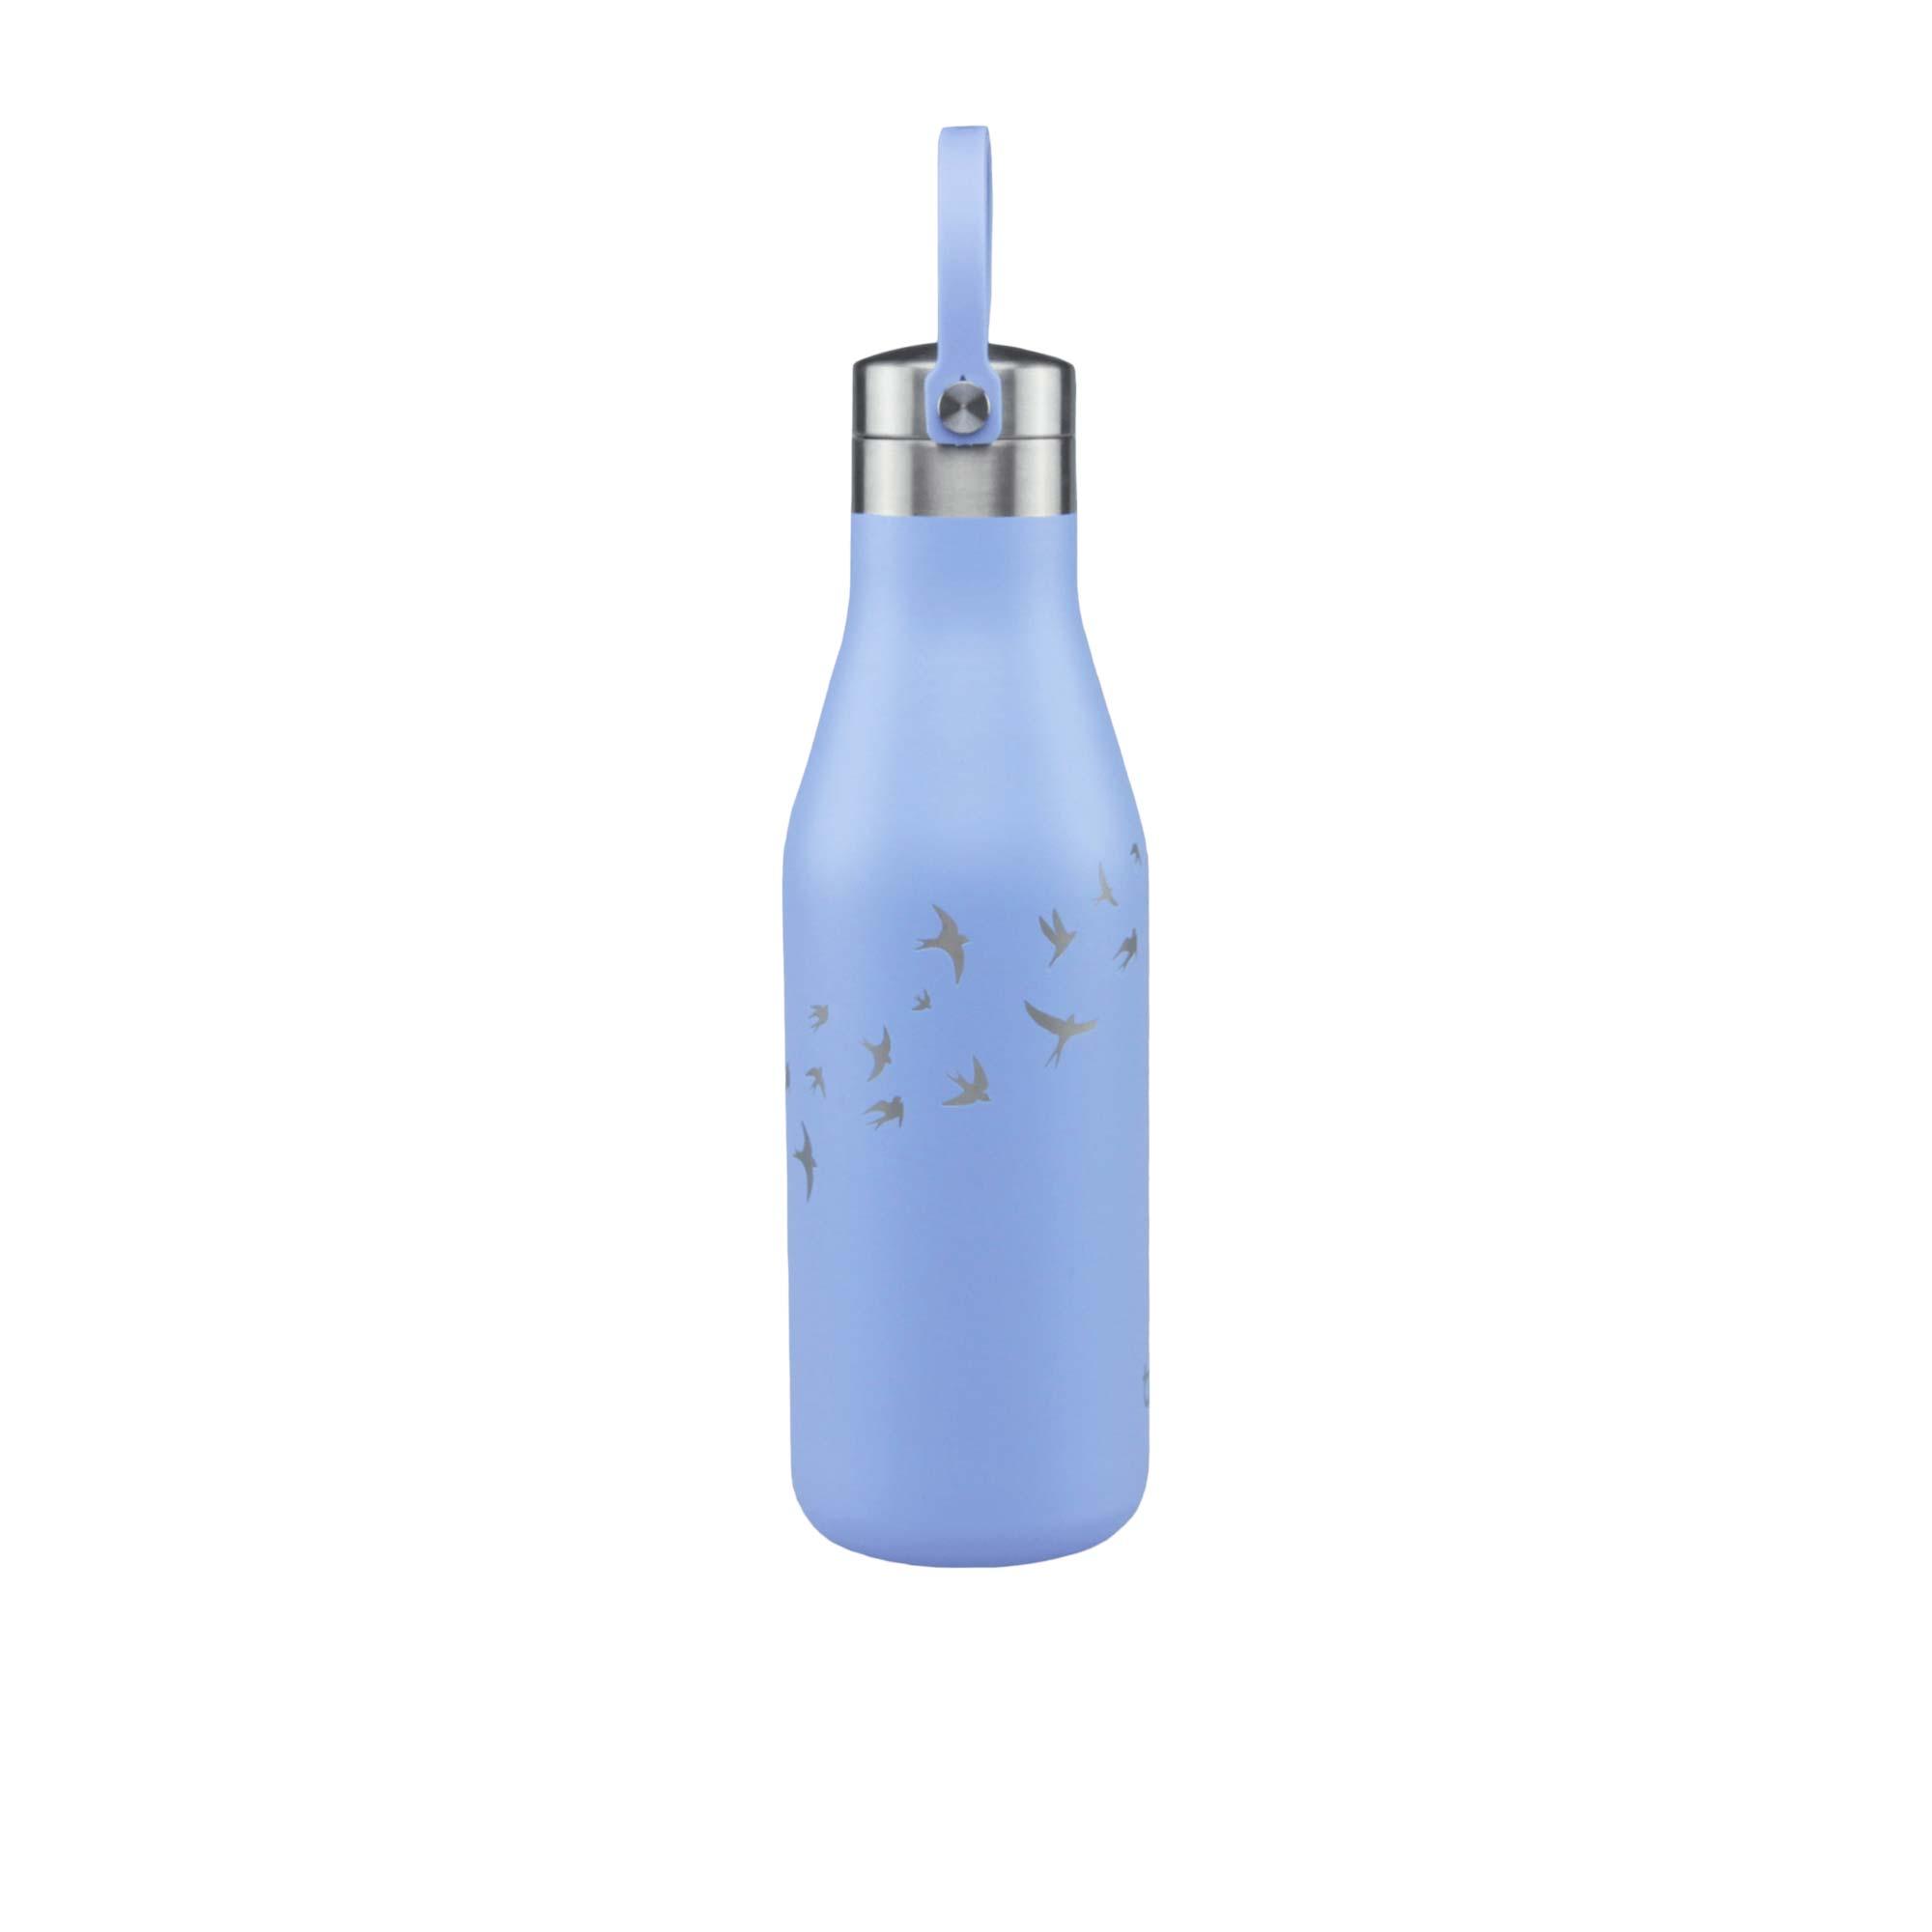 Ohelo Insulated Drink Bottle 500ml Blue Image 4